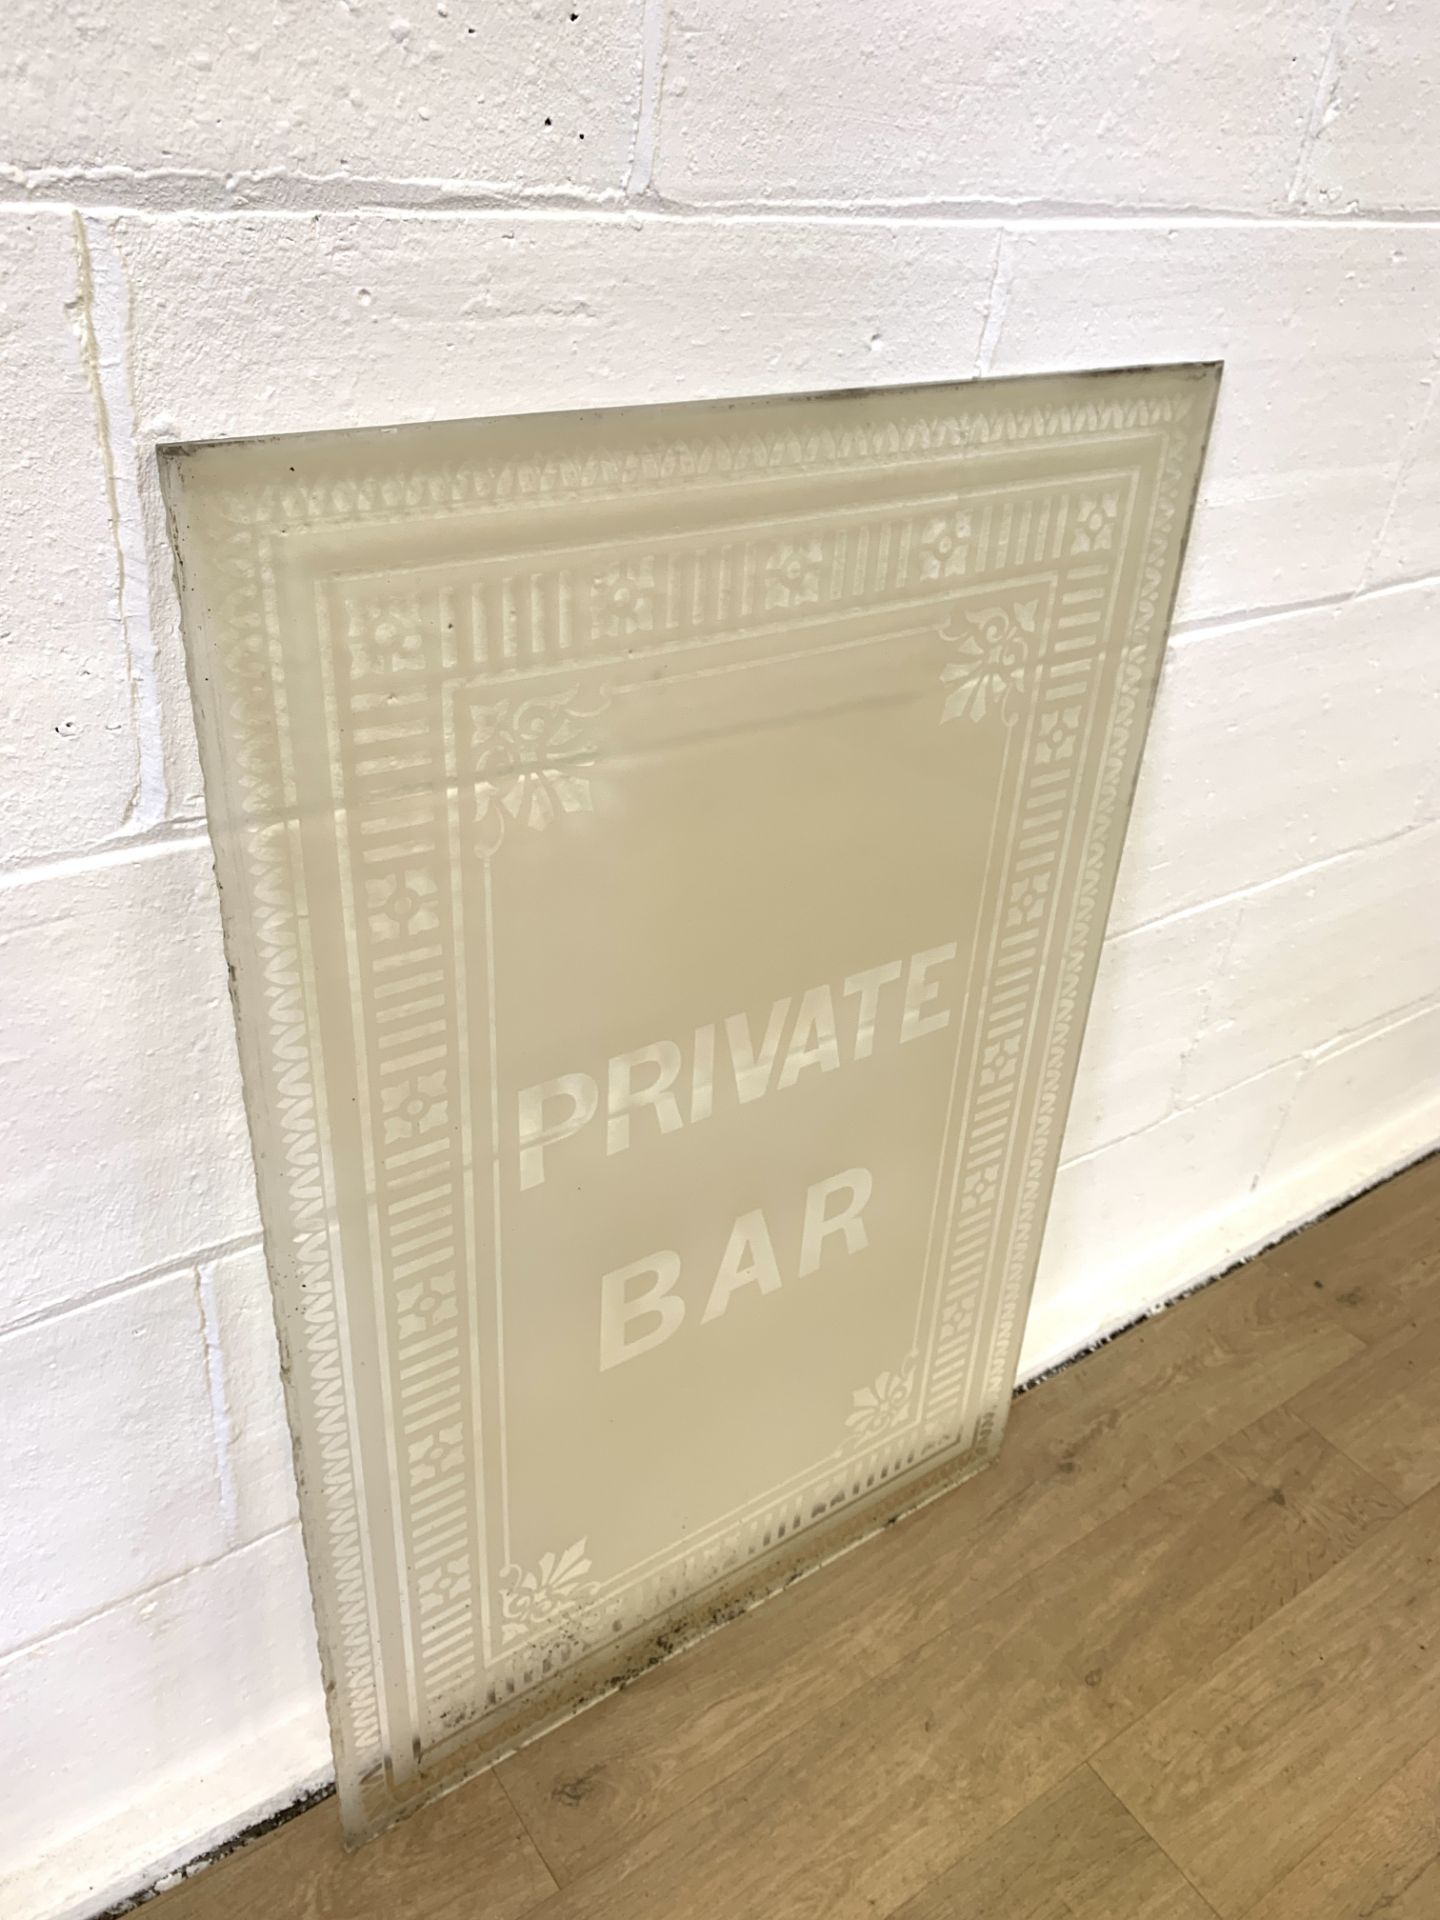 Glass pub sign etched "Private Bar" - Image 3 of 4